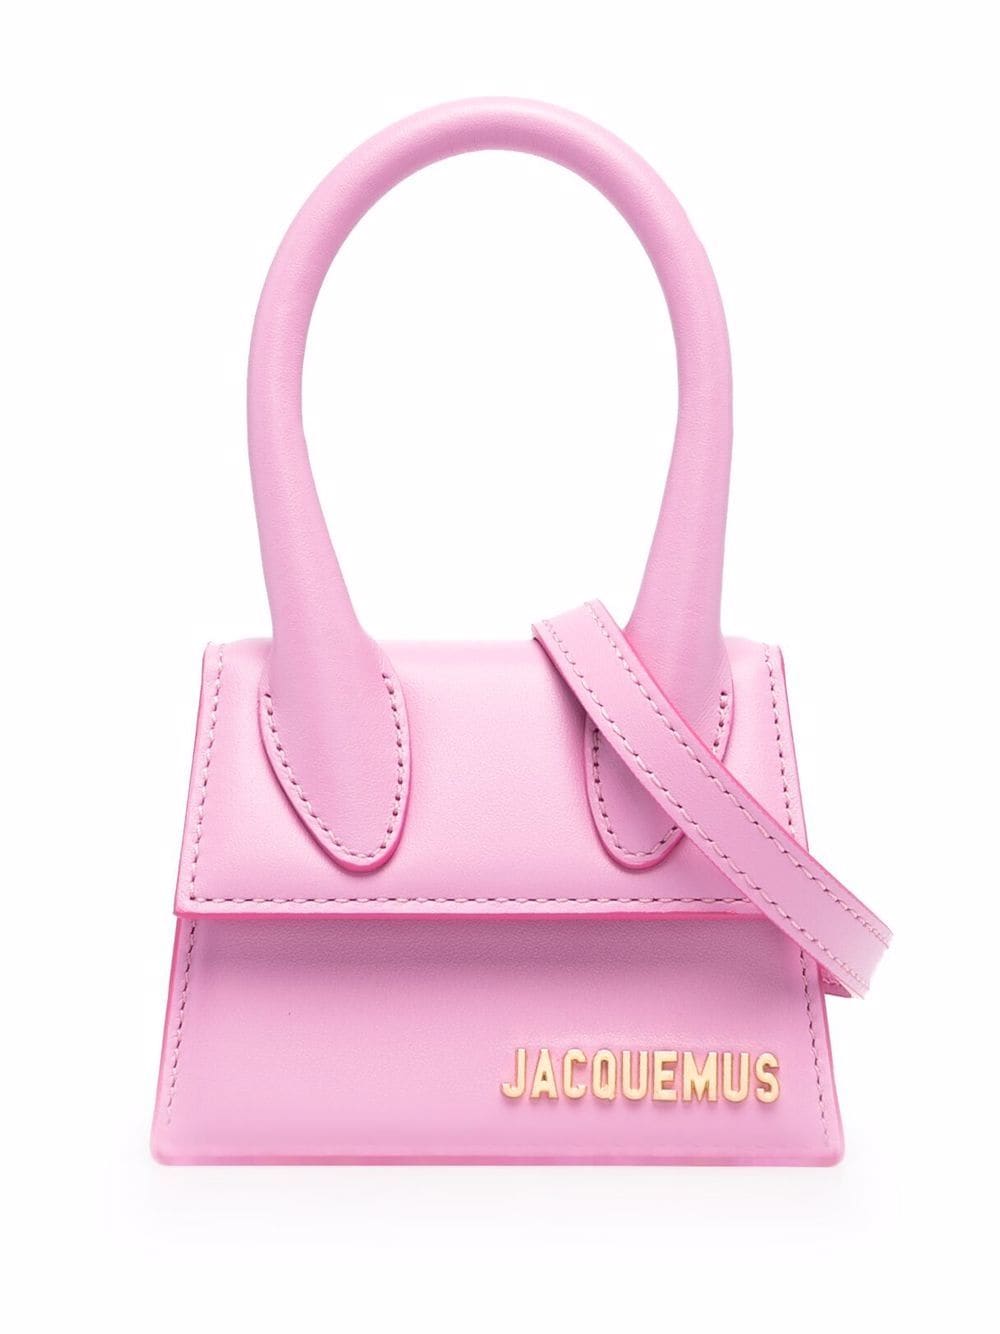 What Is Jacquemus' Le Chiquito And Why Do Celebs Love It?